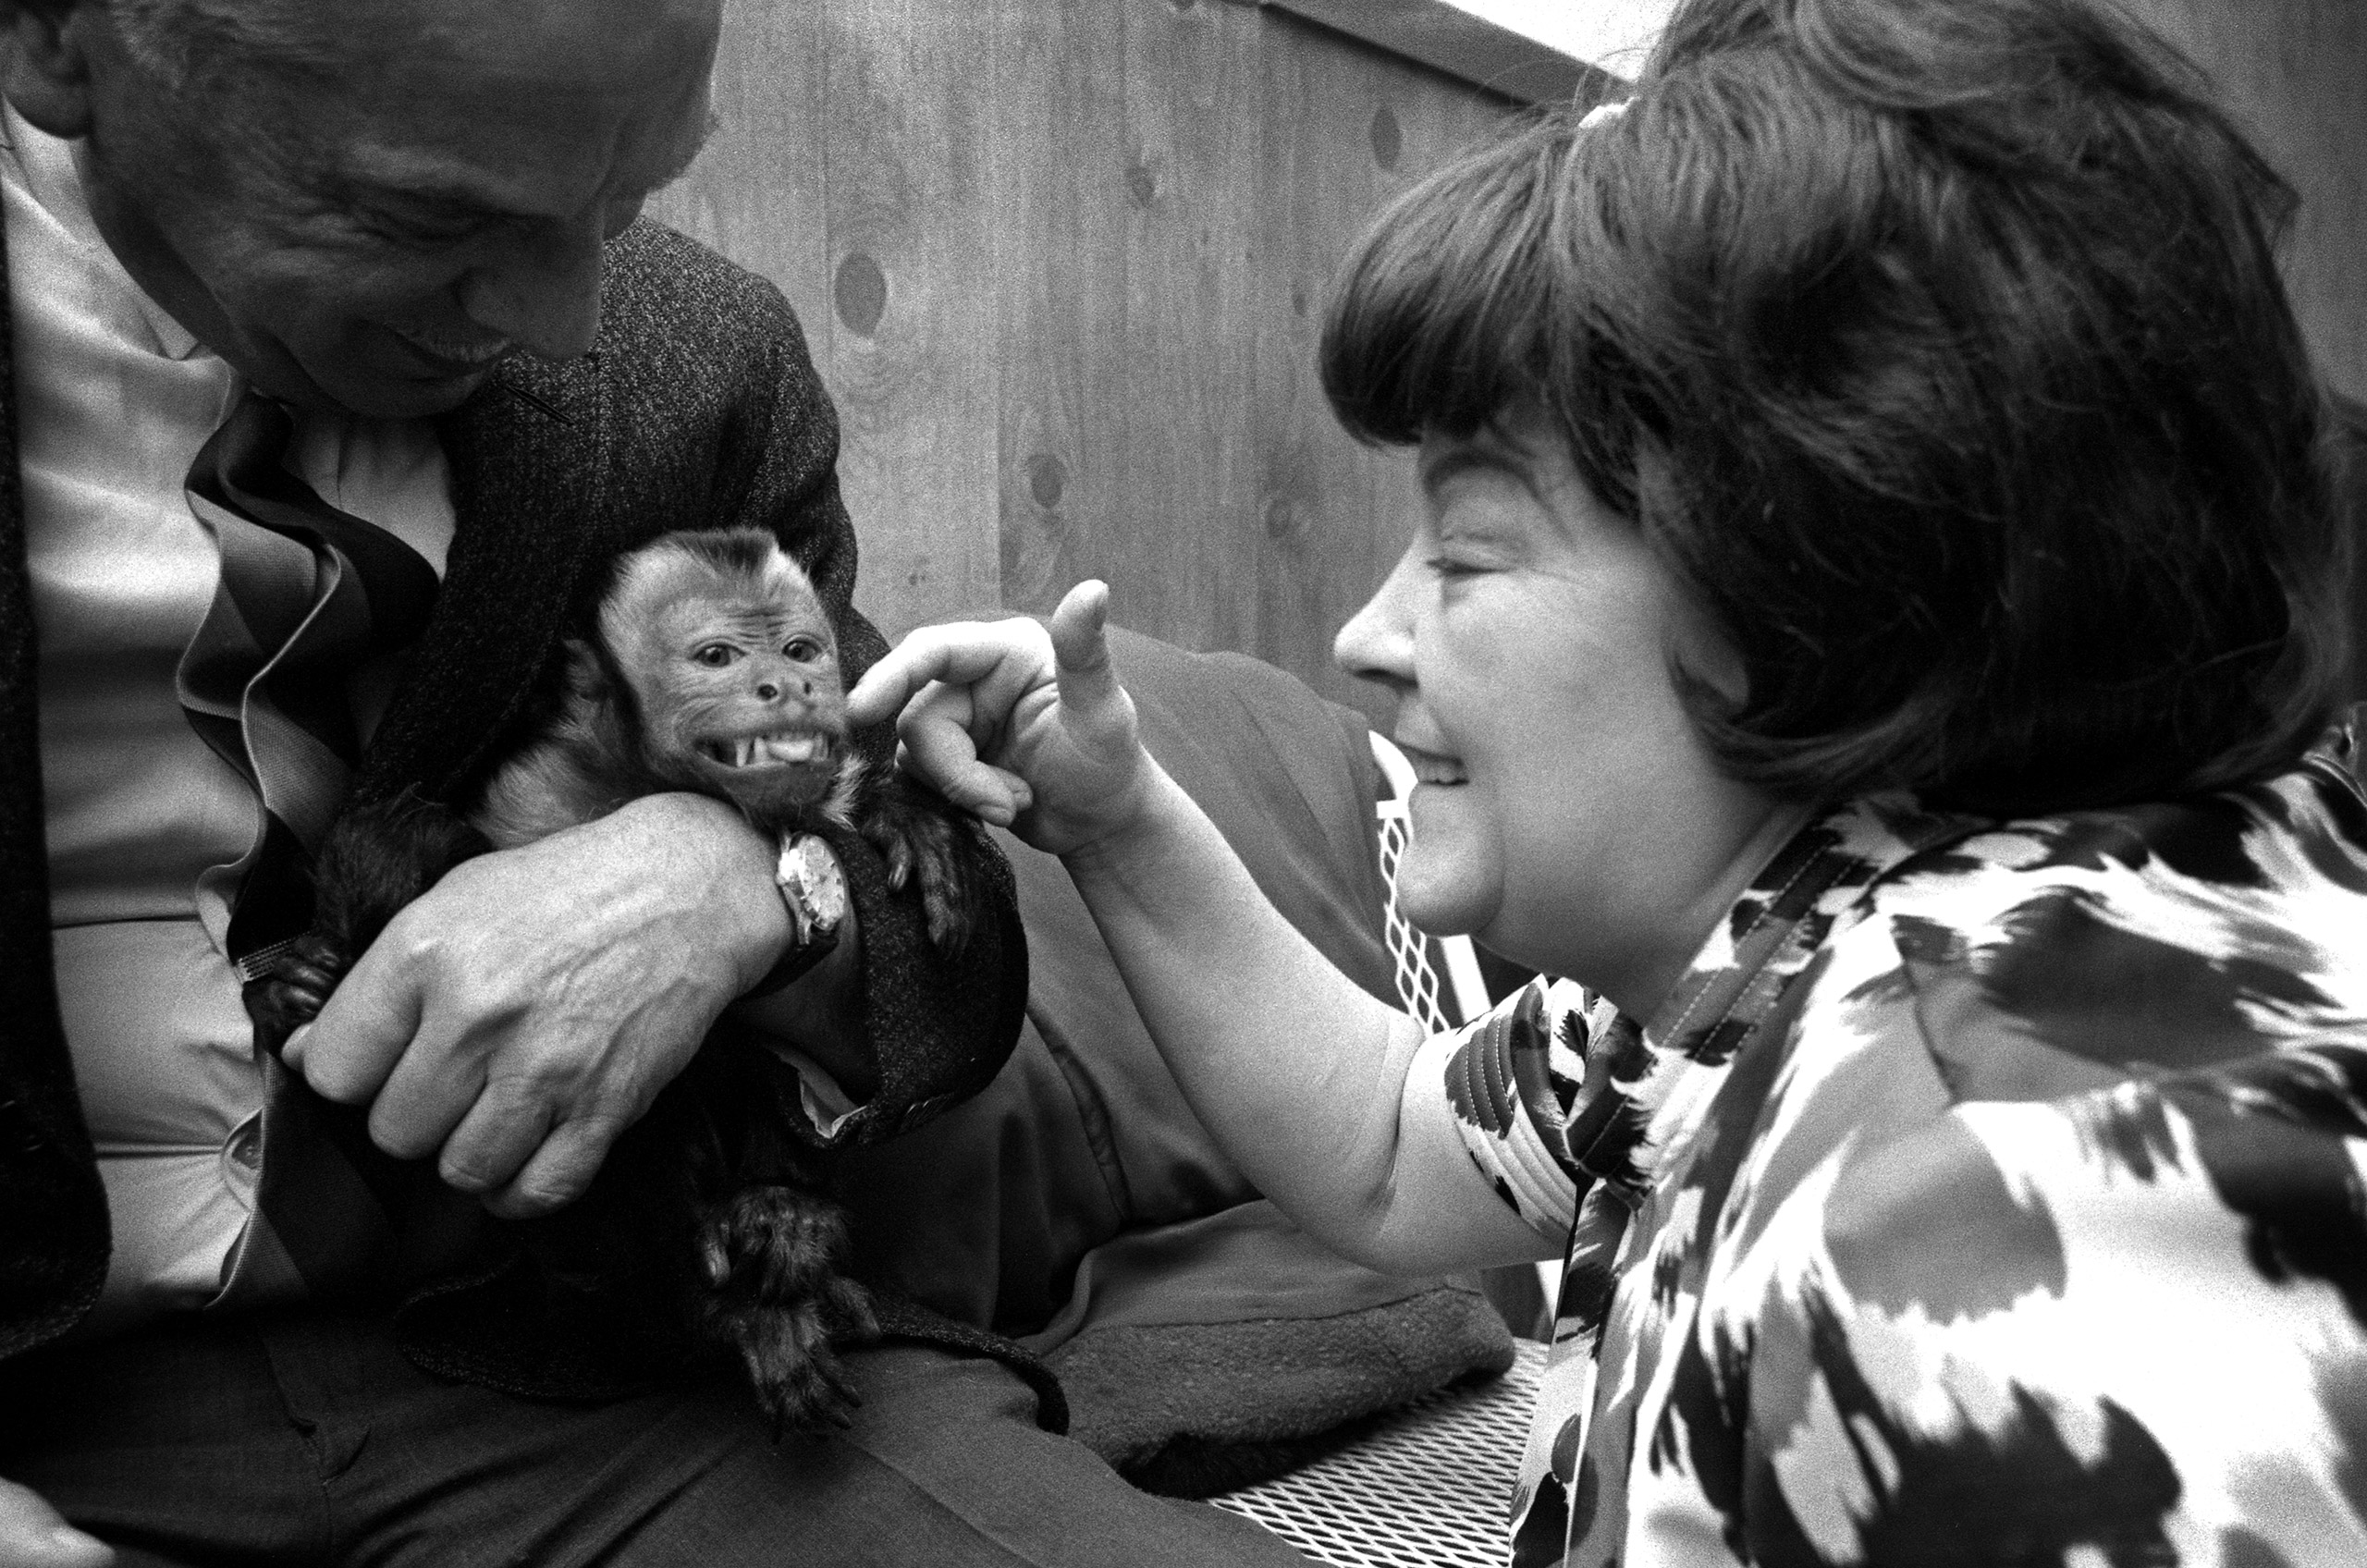 Chi-Chi, a capuchin at the Boston chapter of the Simian Society of America, 1968. Published in  Monkey Business,  LOOK 32: 16 (Aug. 6, 1968).